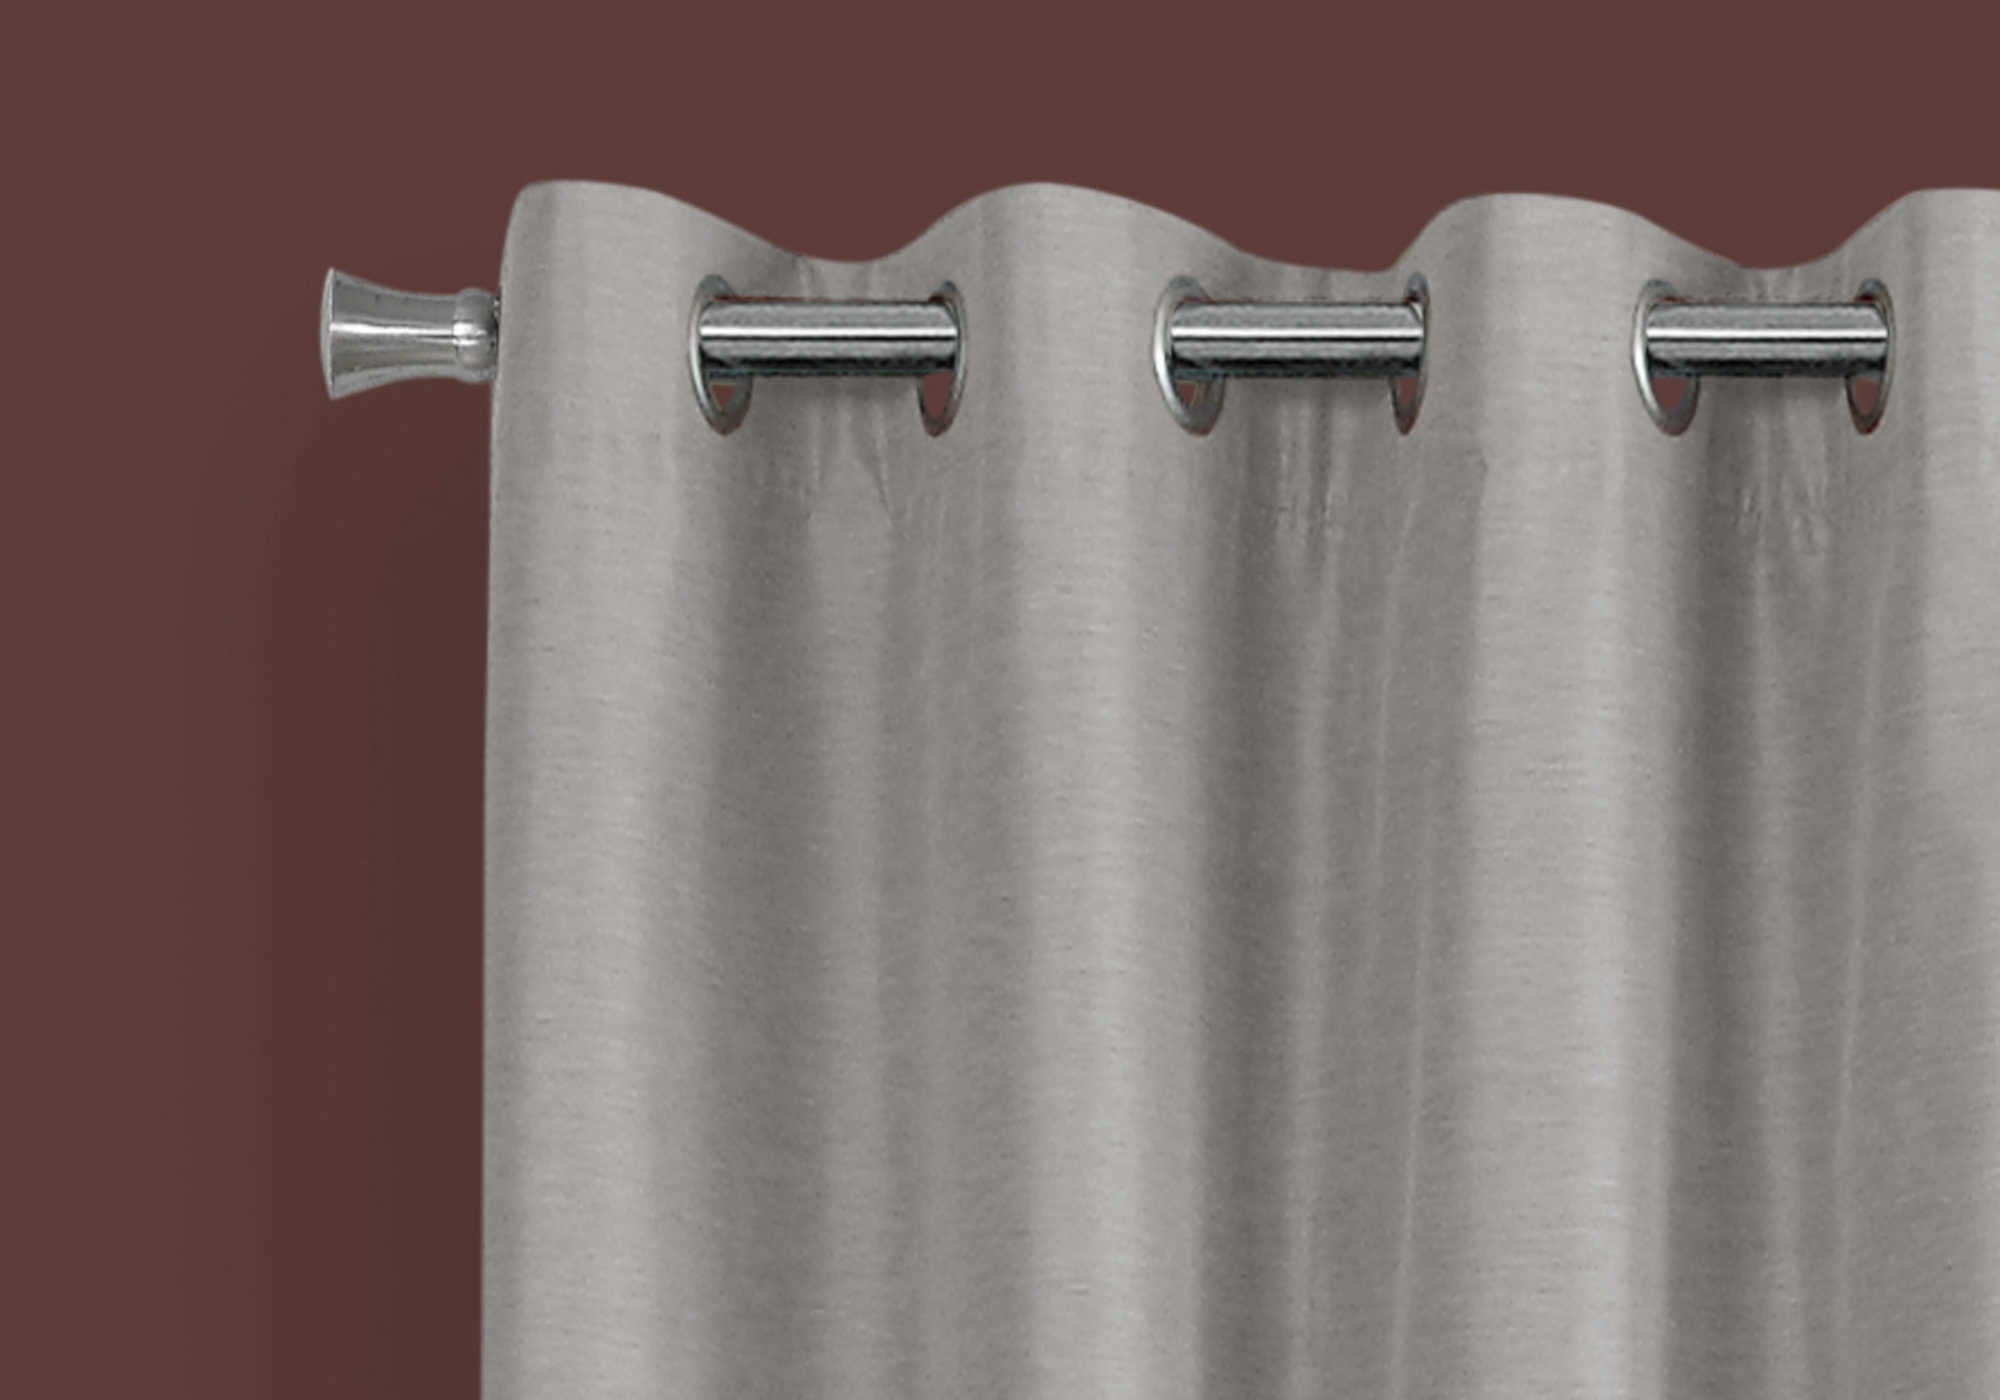 CURTAIN PANEL - 2PCS / 52"W X 84"H SILVER SOLID BLACKOUT